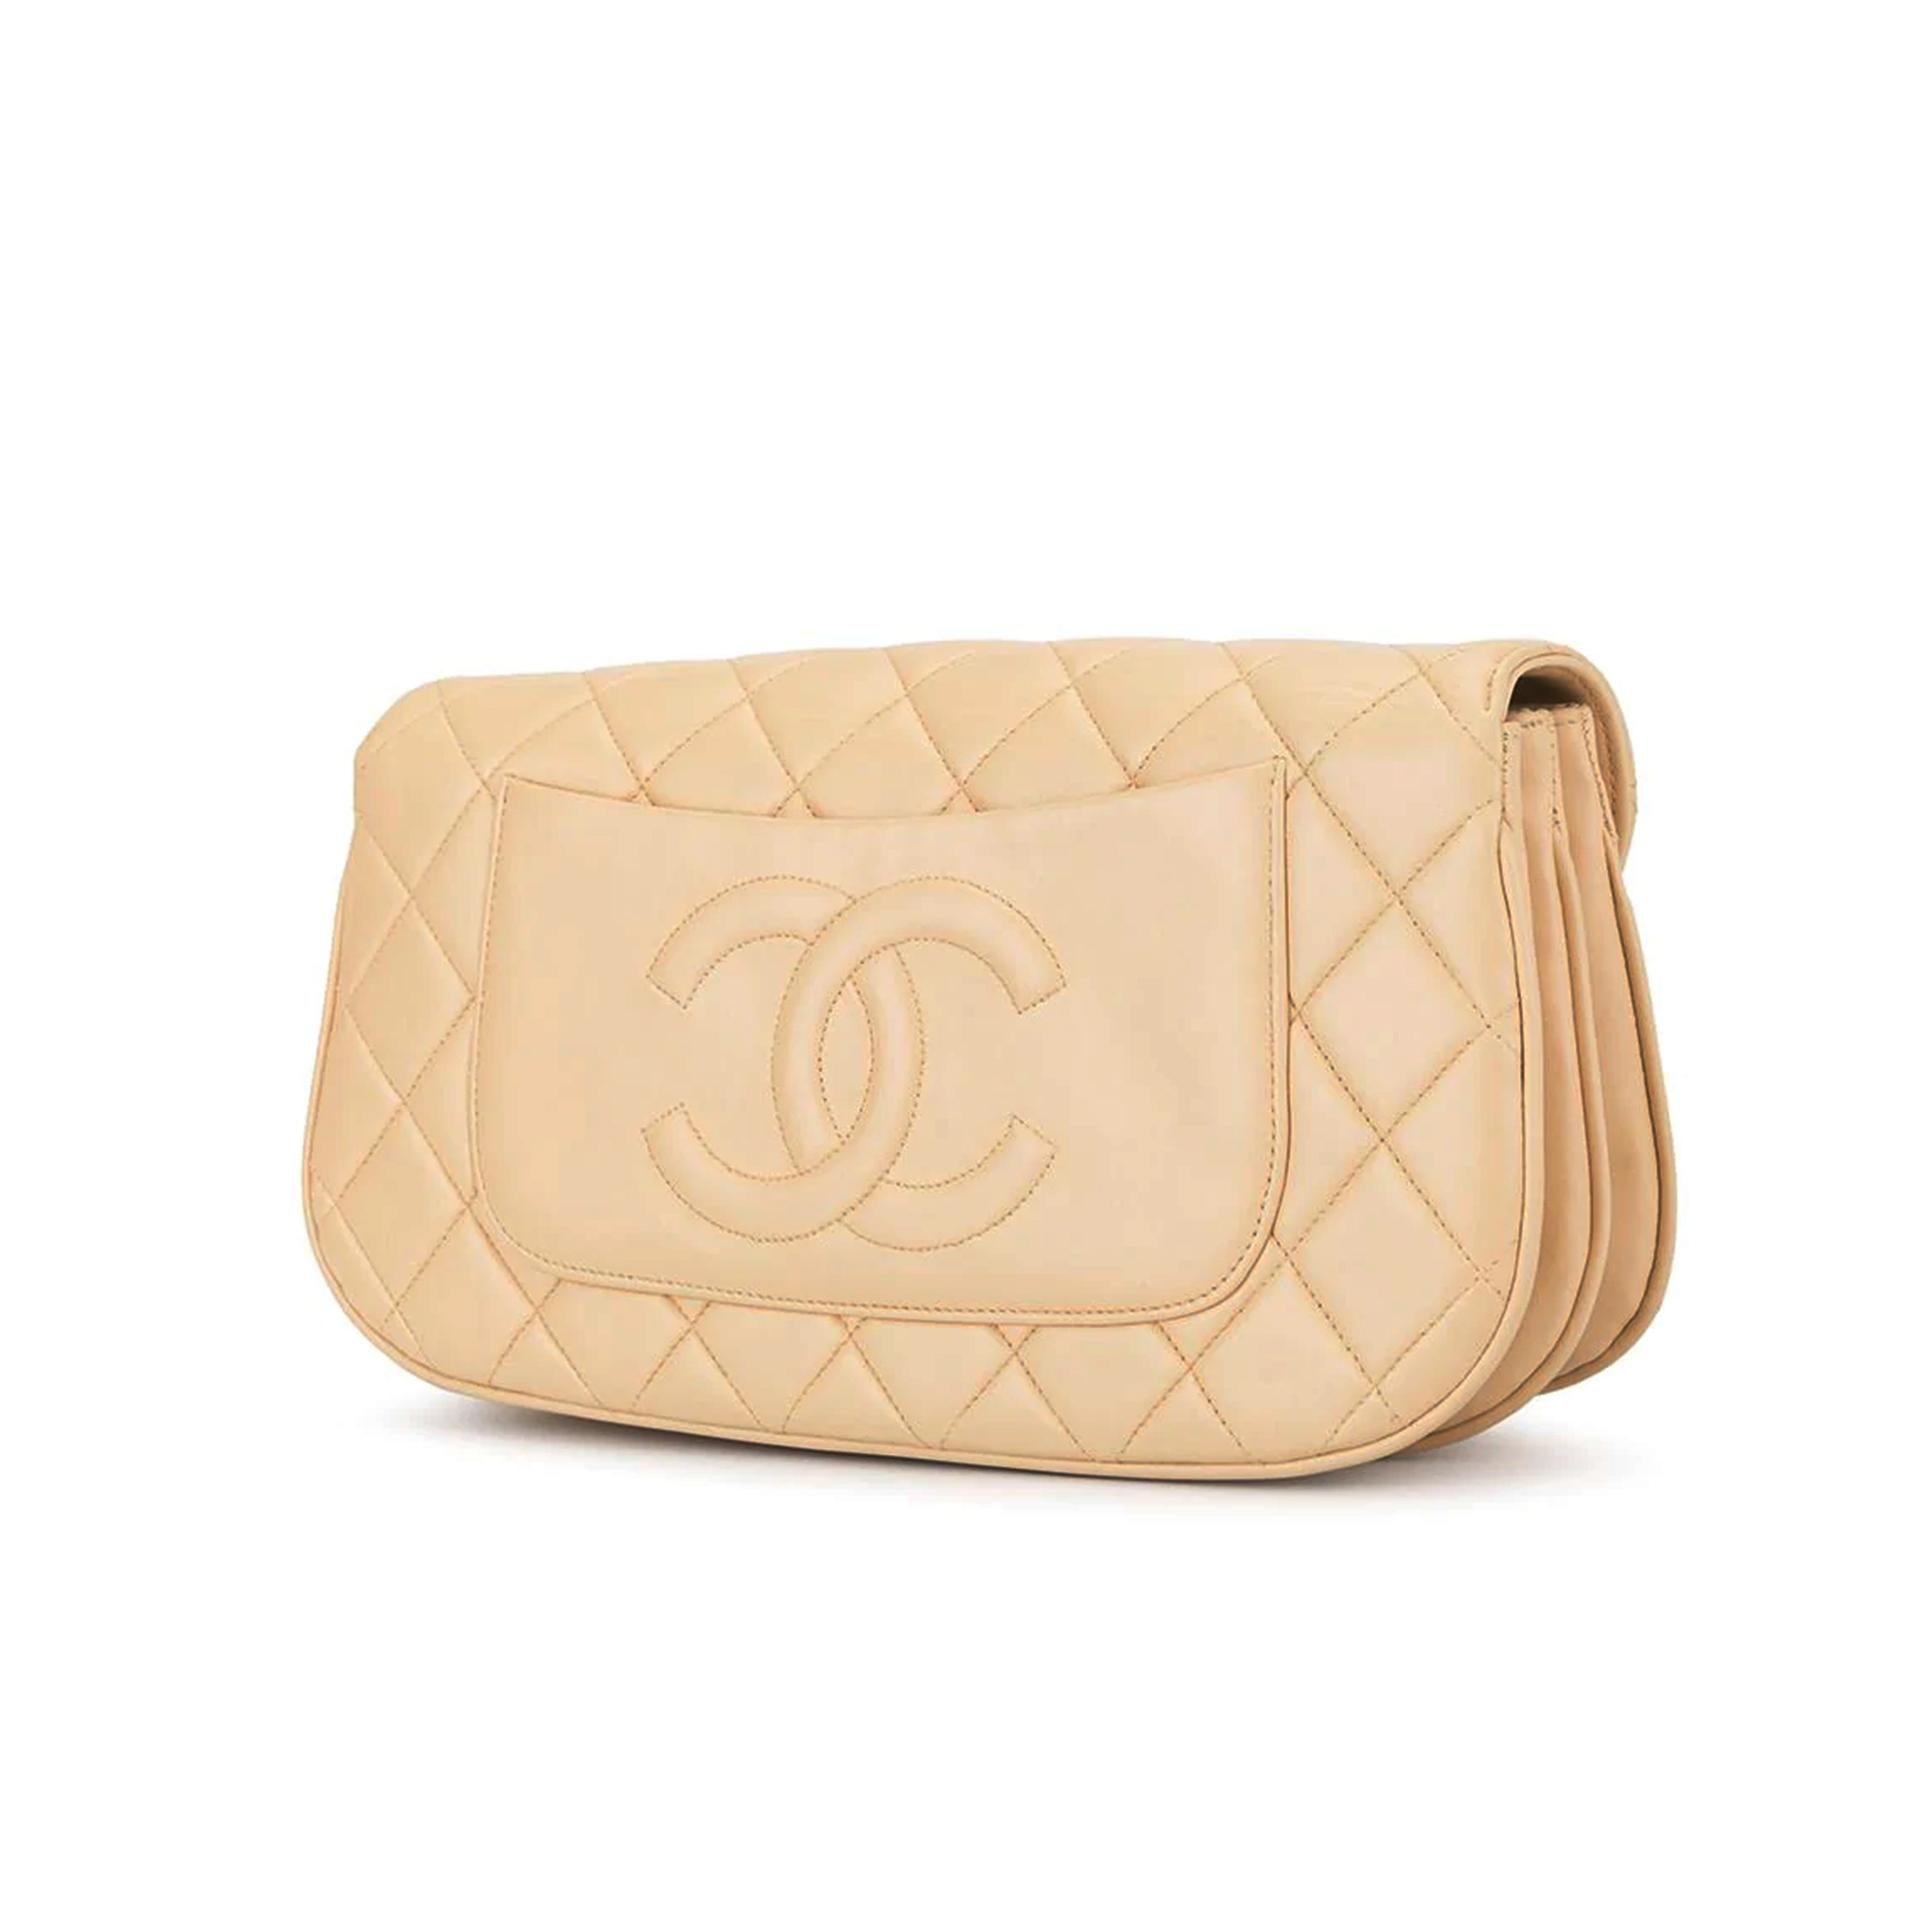 Chanel Bag Top Handle Vintage Rare Triple CC Turnlock Convertible Flap Clutch In Good Condition For Sale In Miami, FL